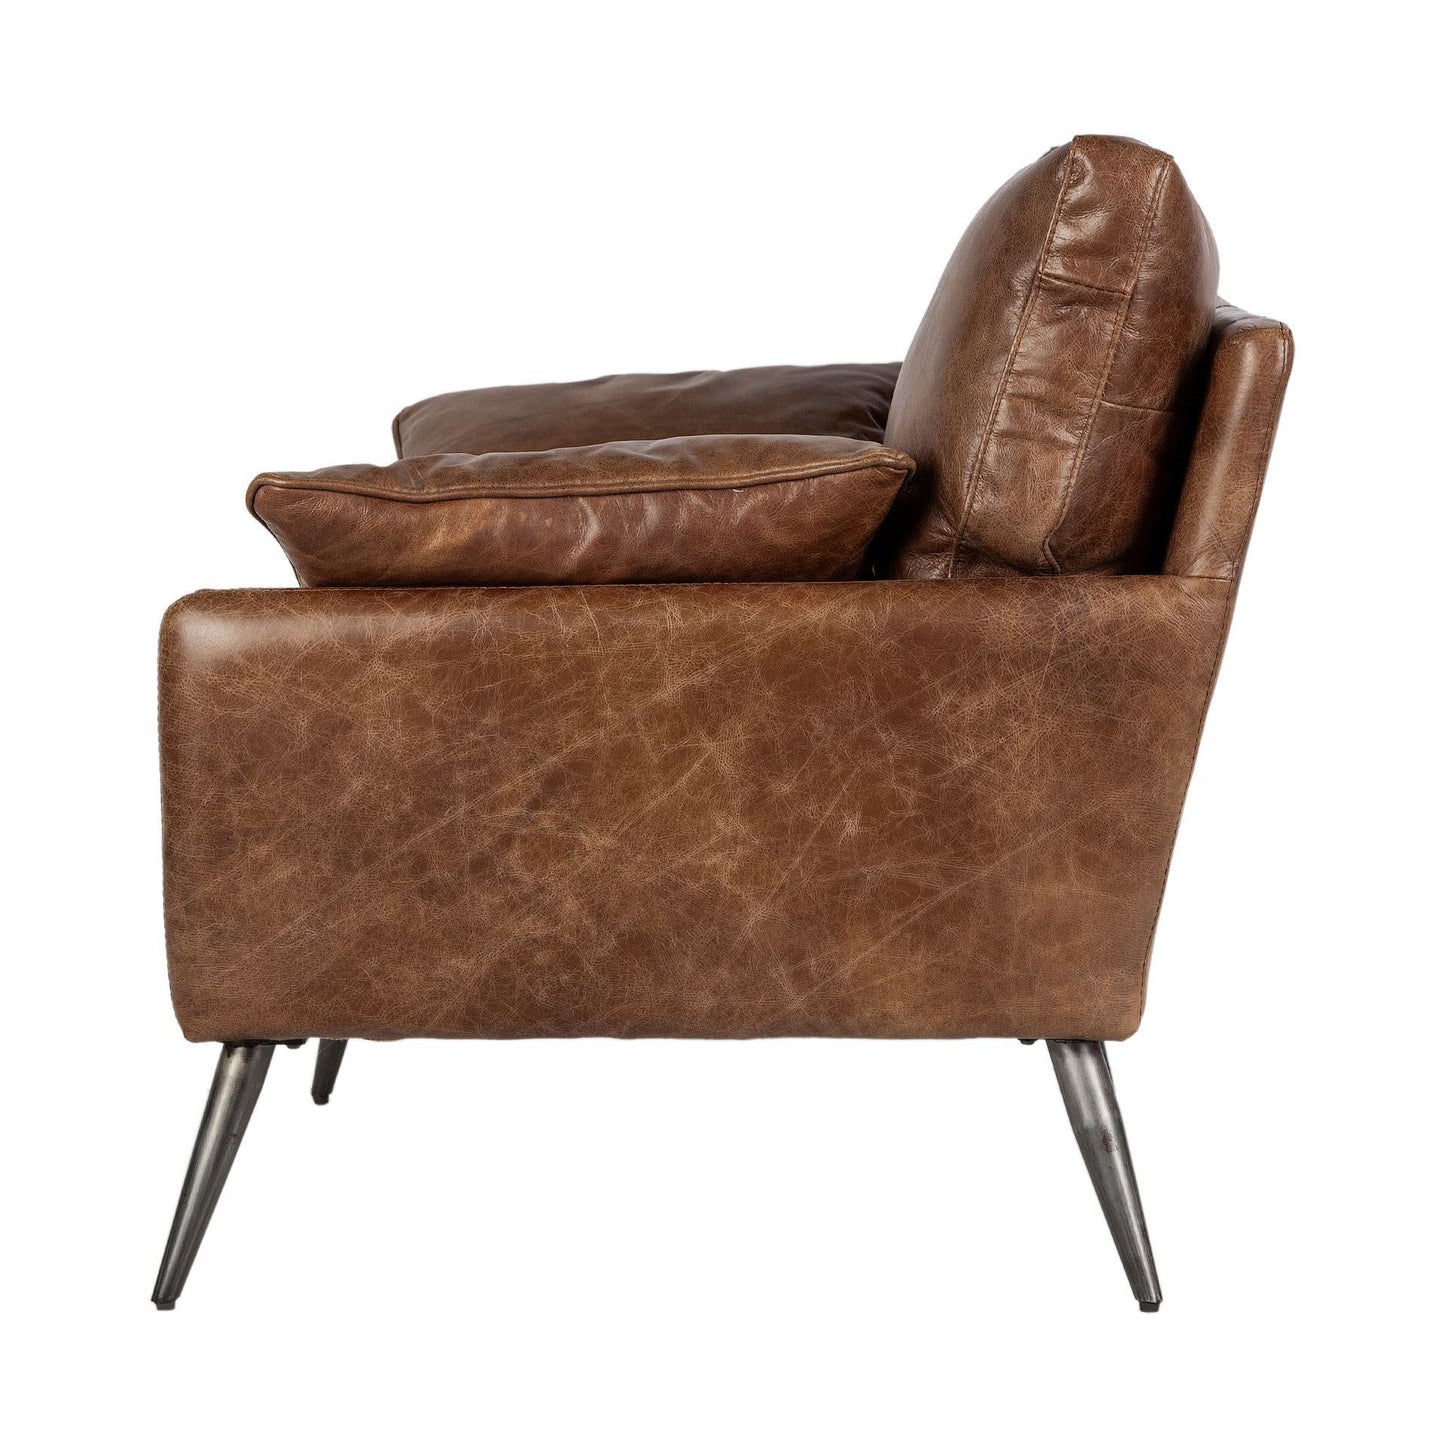 Espresso Brown Top-Grain Leather Wide Accent chair with Wooden Frame and Iron Legs By Homeroots